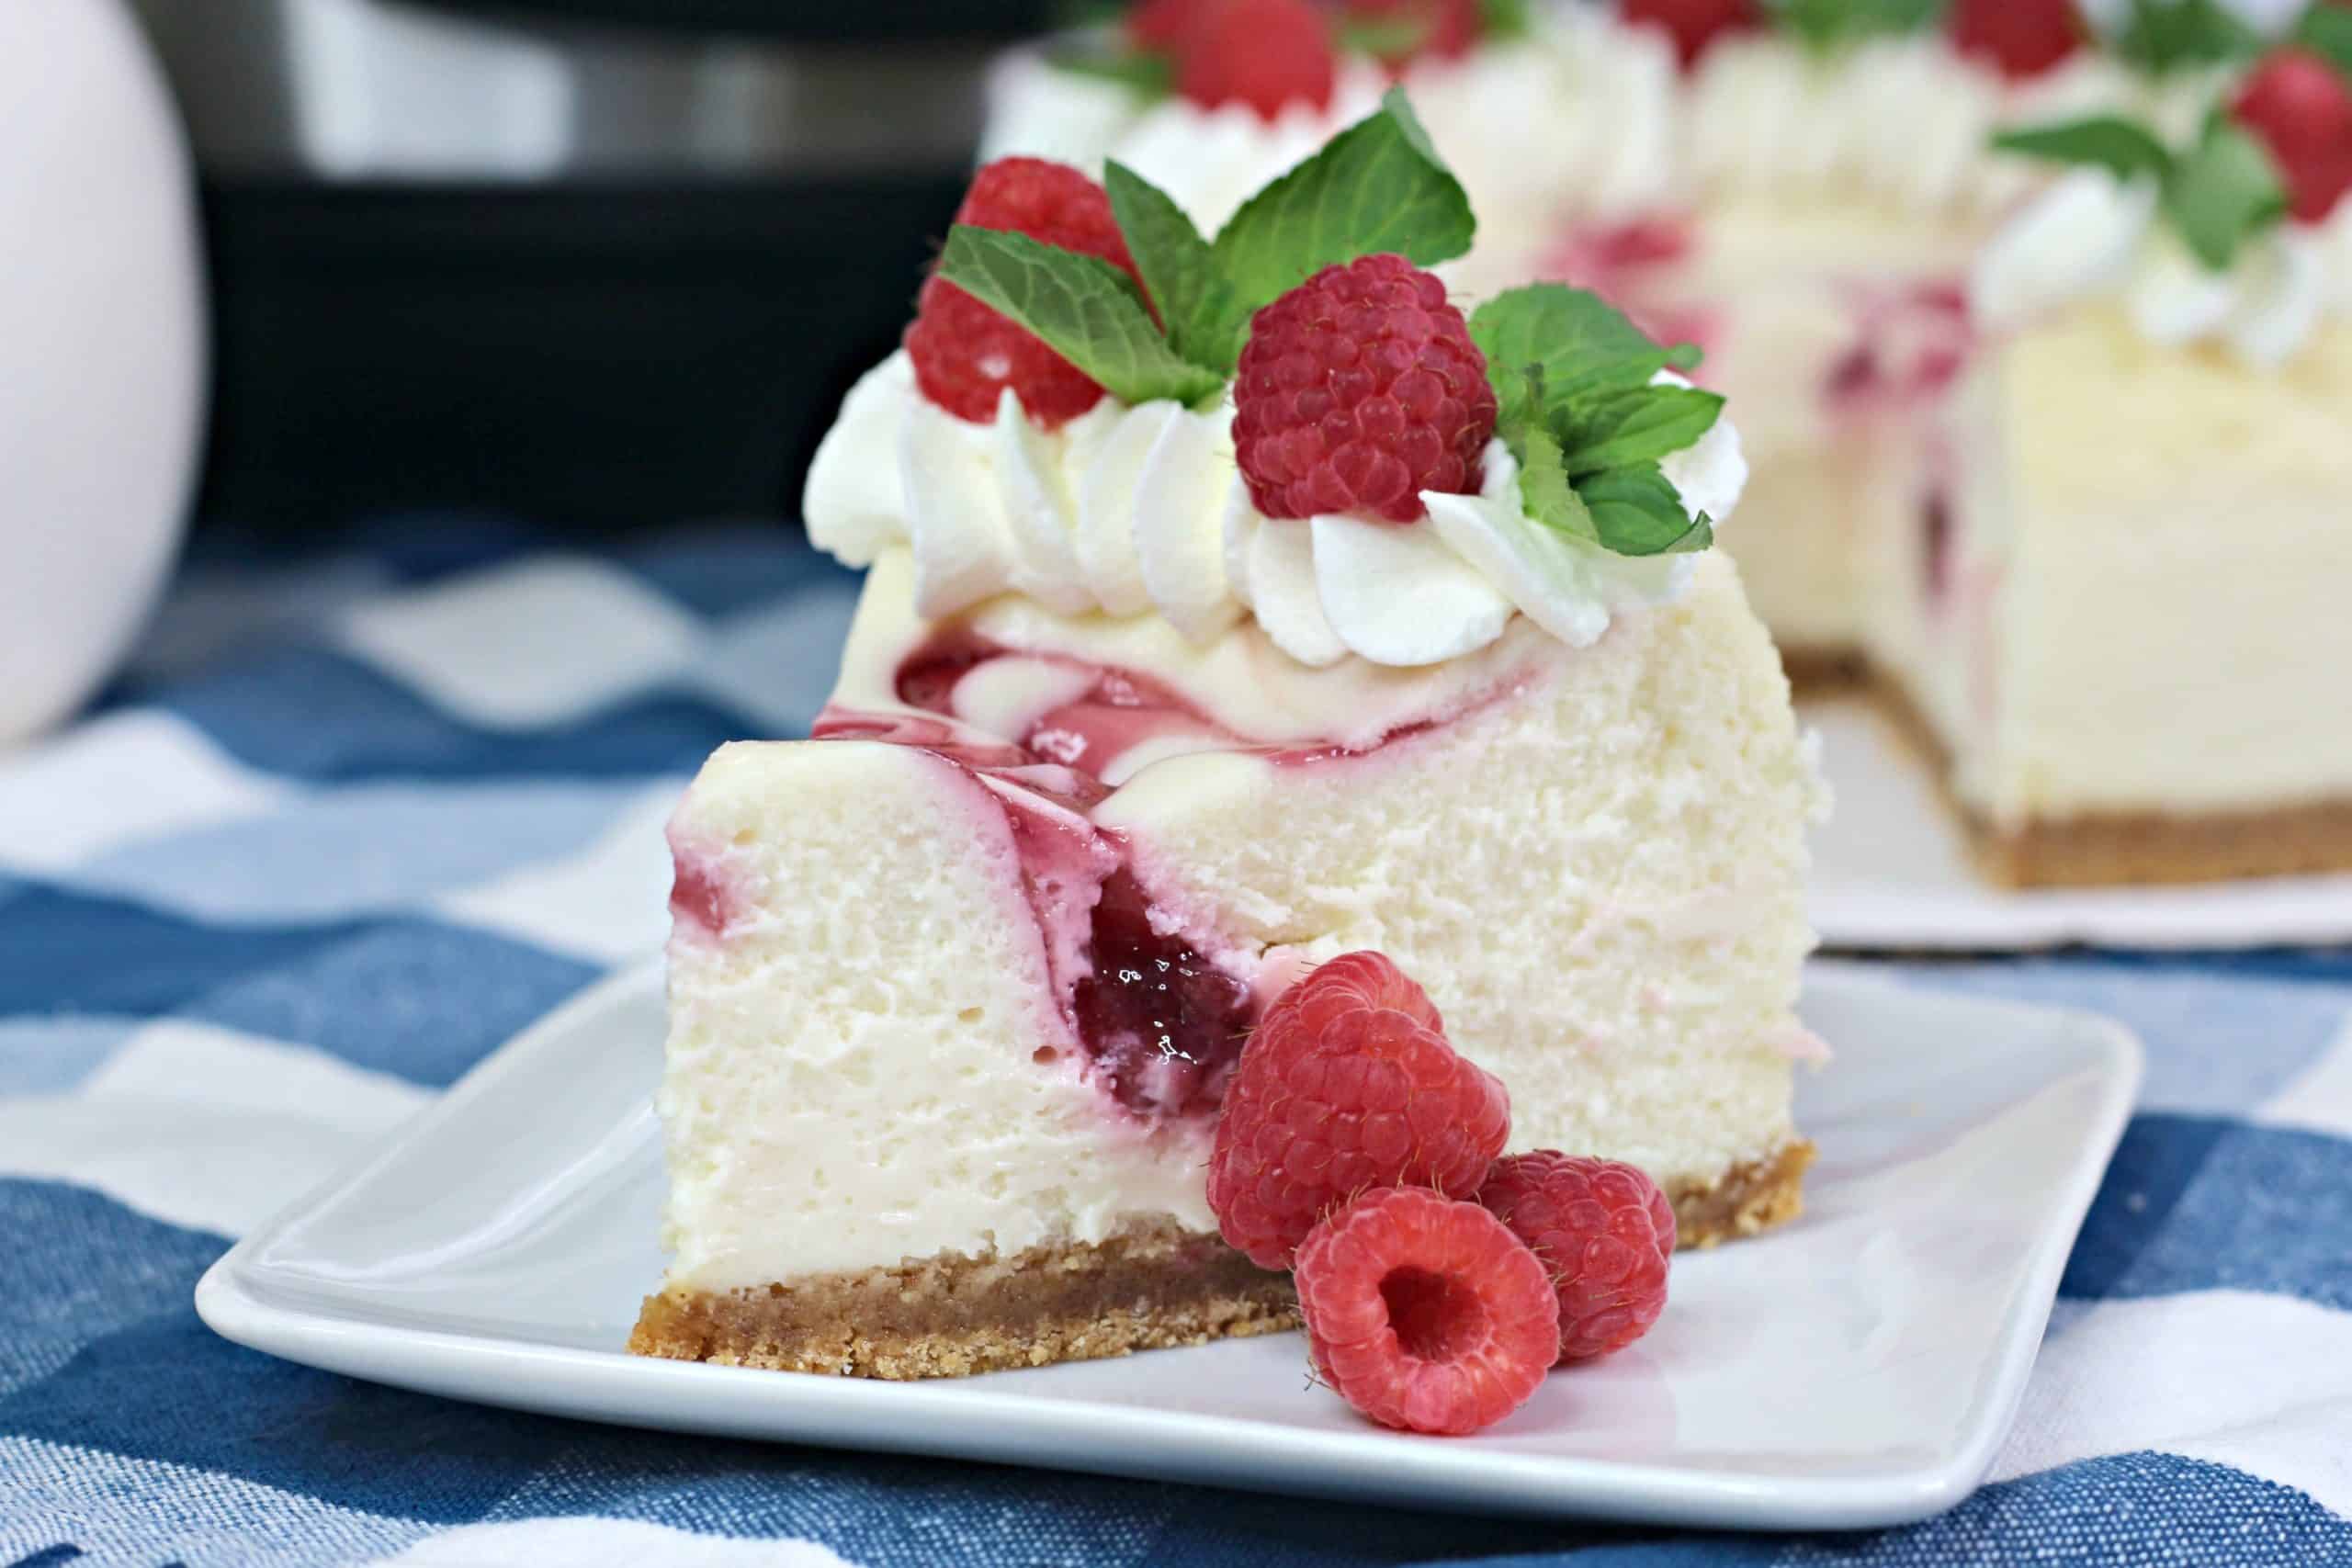 Slice of cheesecake on plate